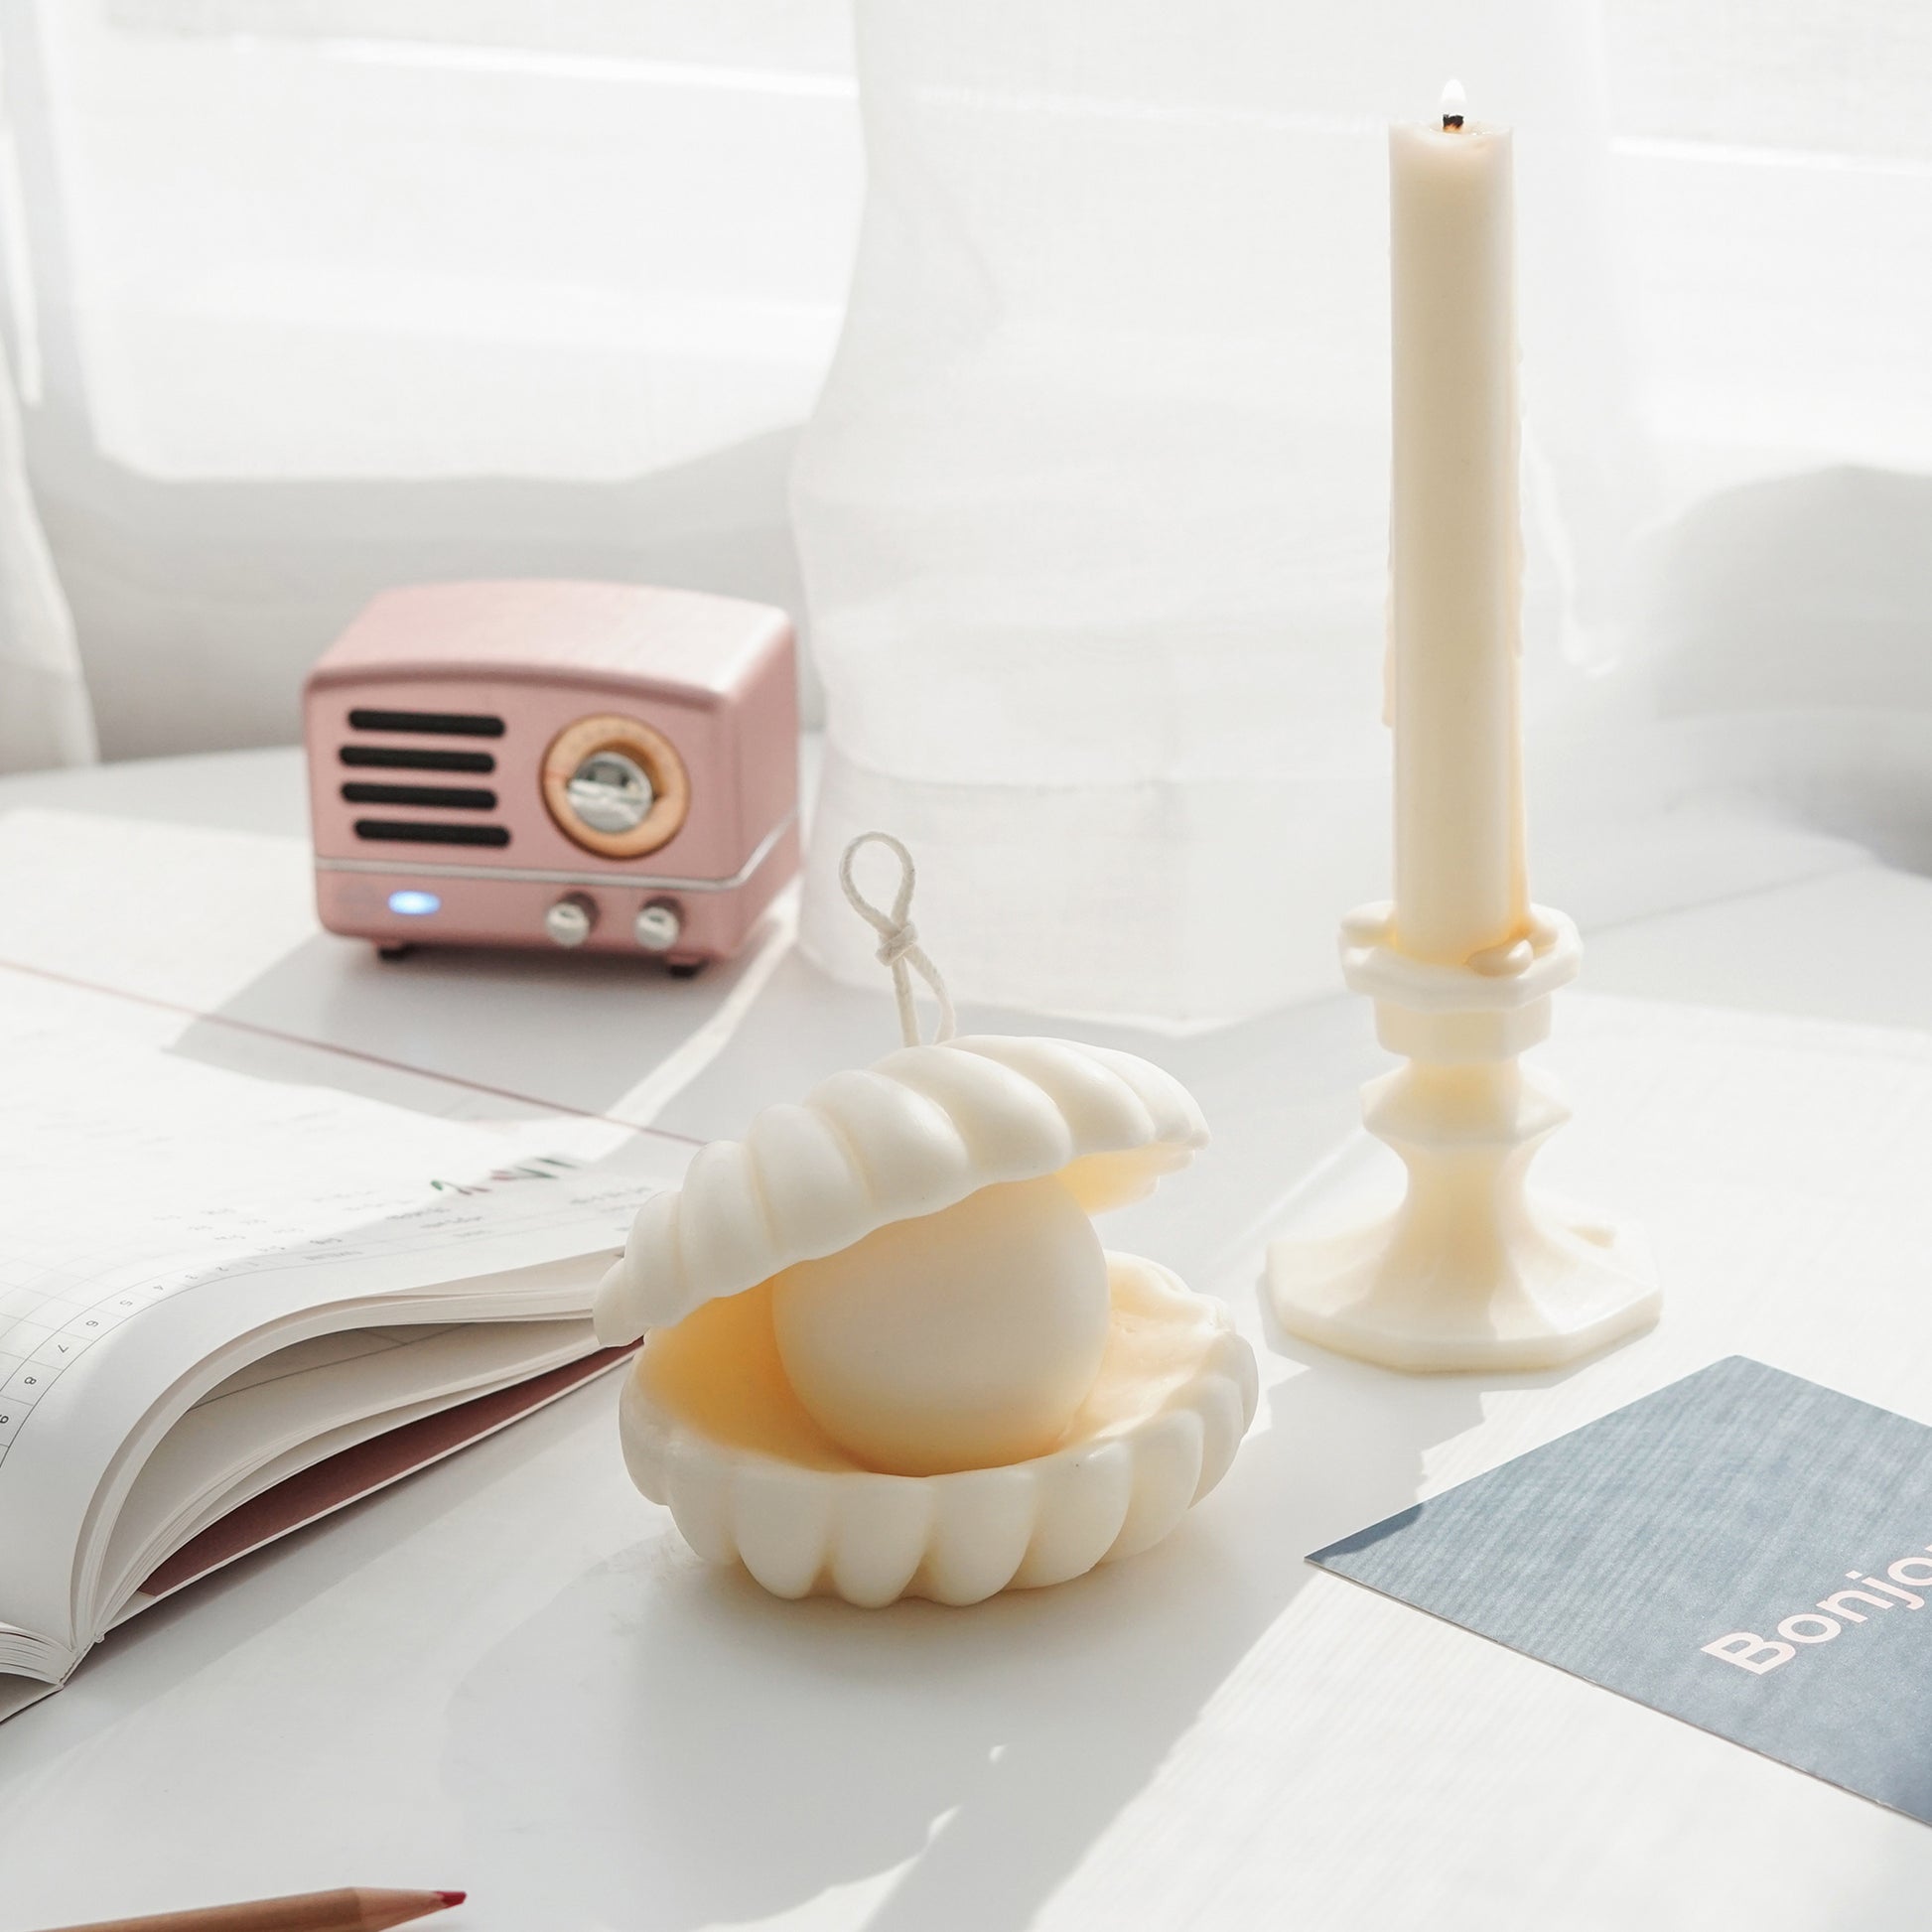 shell pearl white soy pillar candle, blue bonjour postcard, planner, color pencil, pink mini speaker, and a lit taper candle